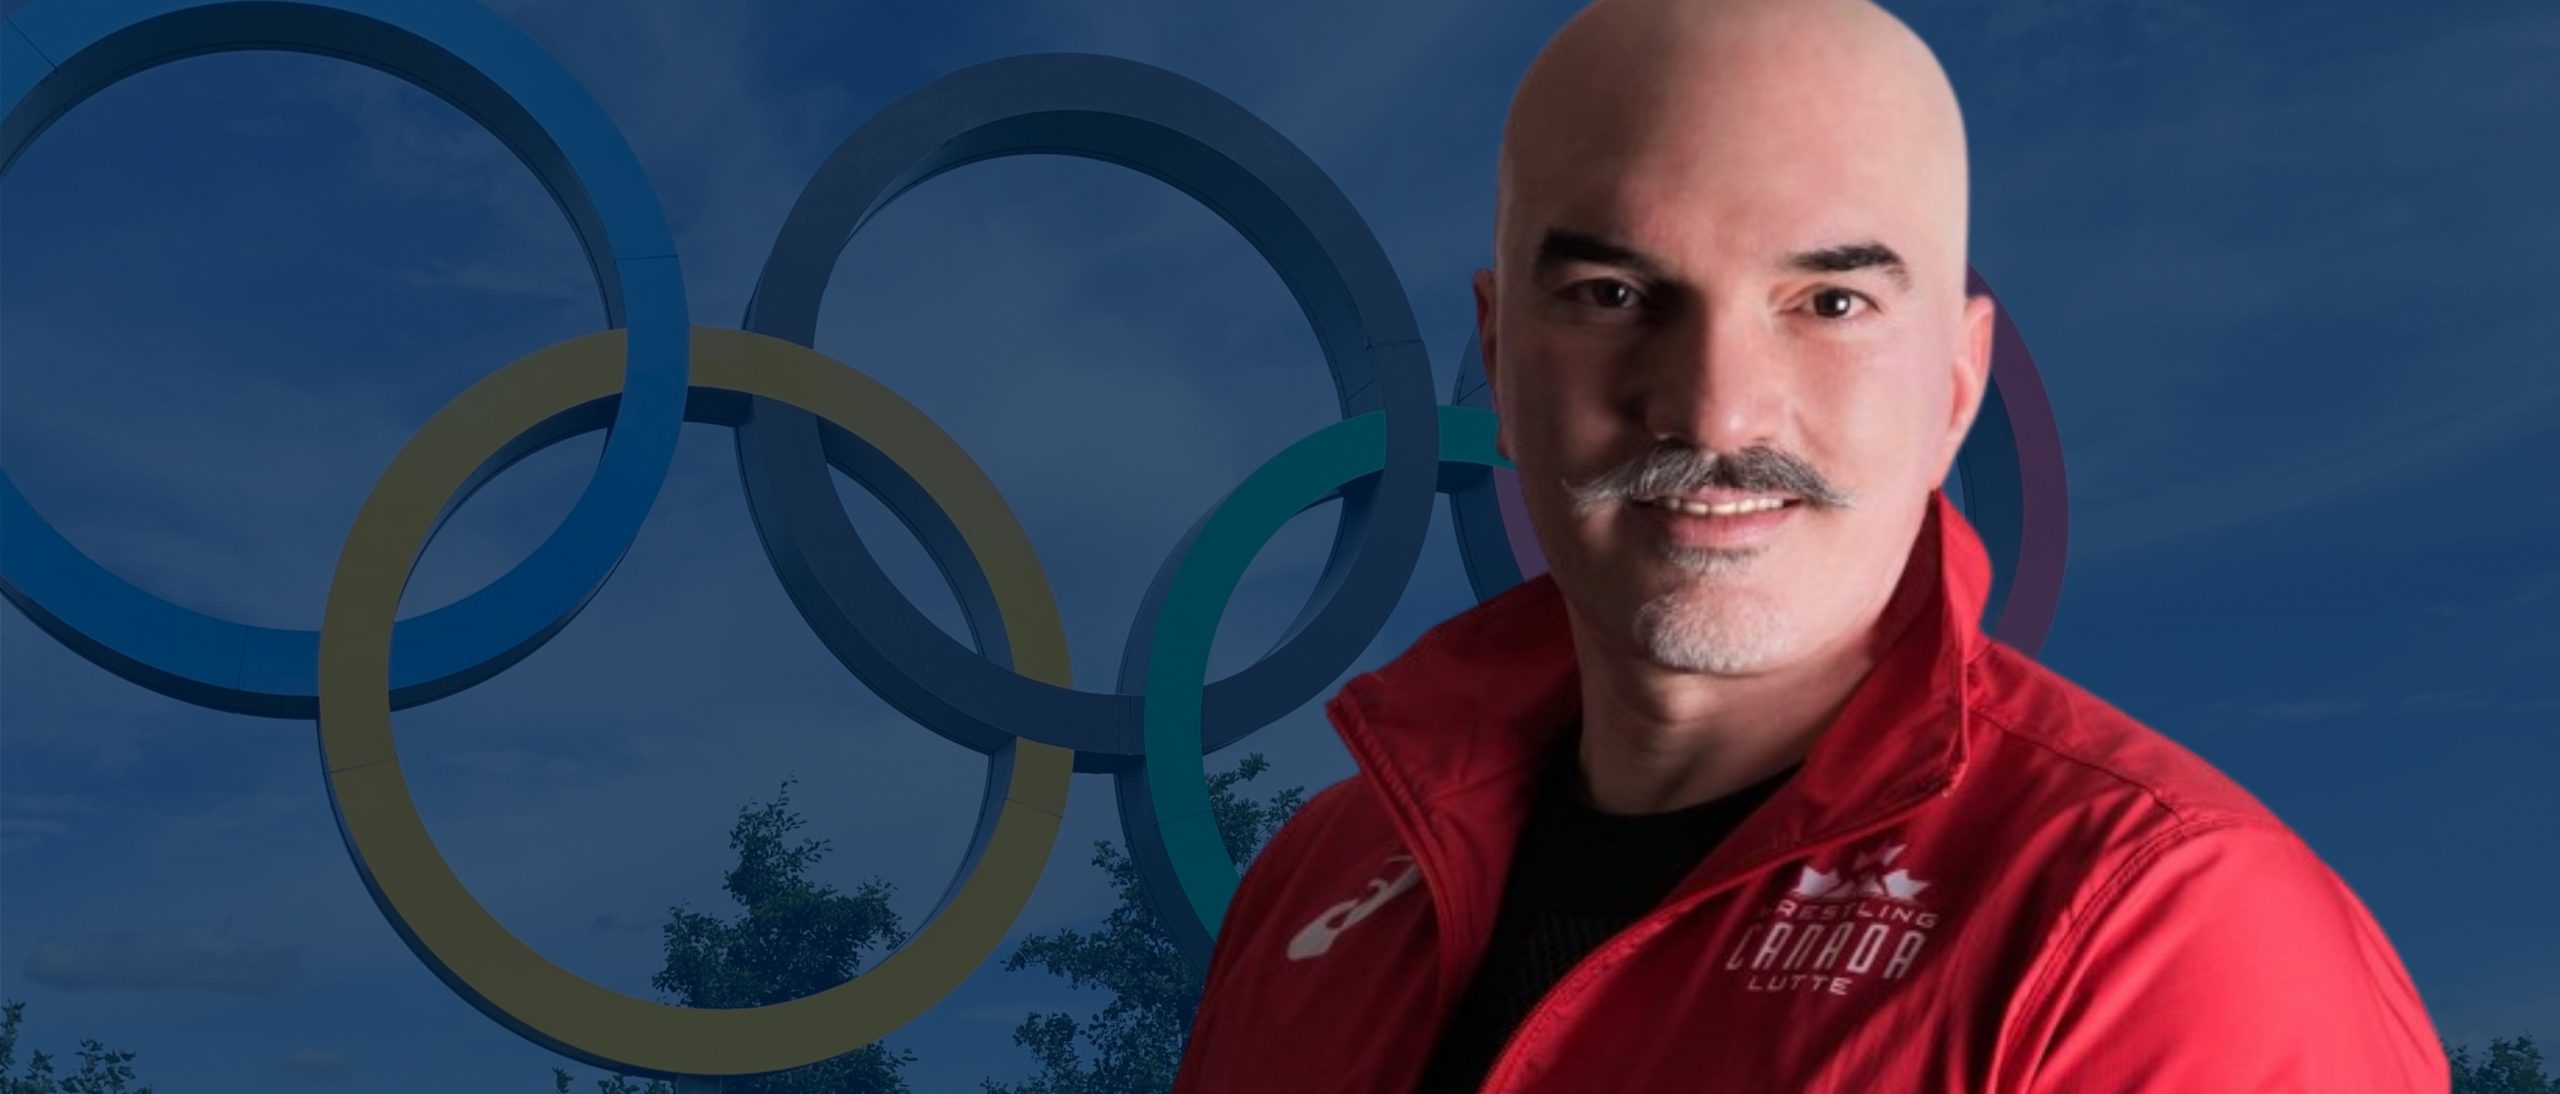 Dr. Babak Shadgan Attends 2020 Tokyo Olympic Games as Medical Director of Wrestling Competitions